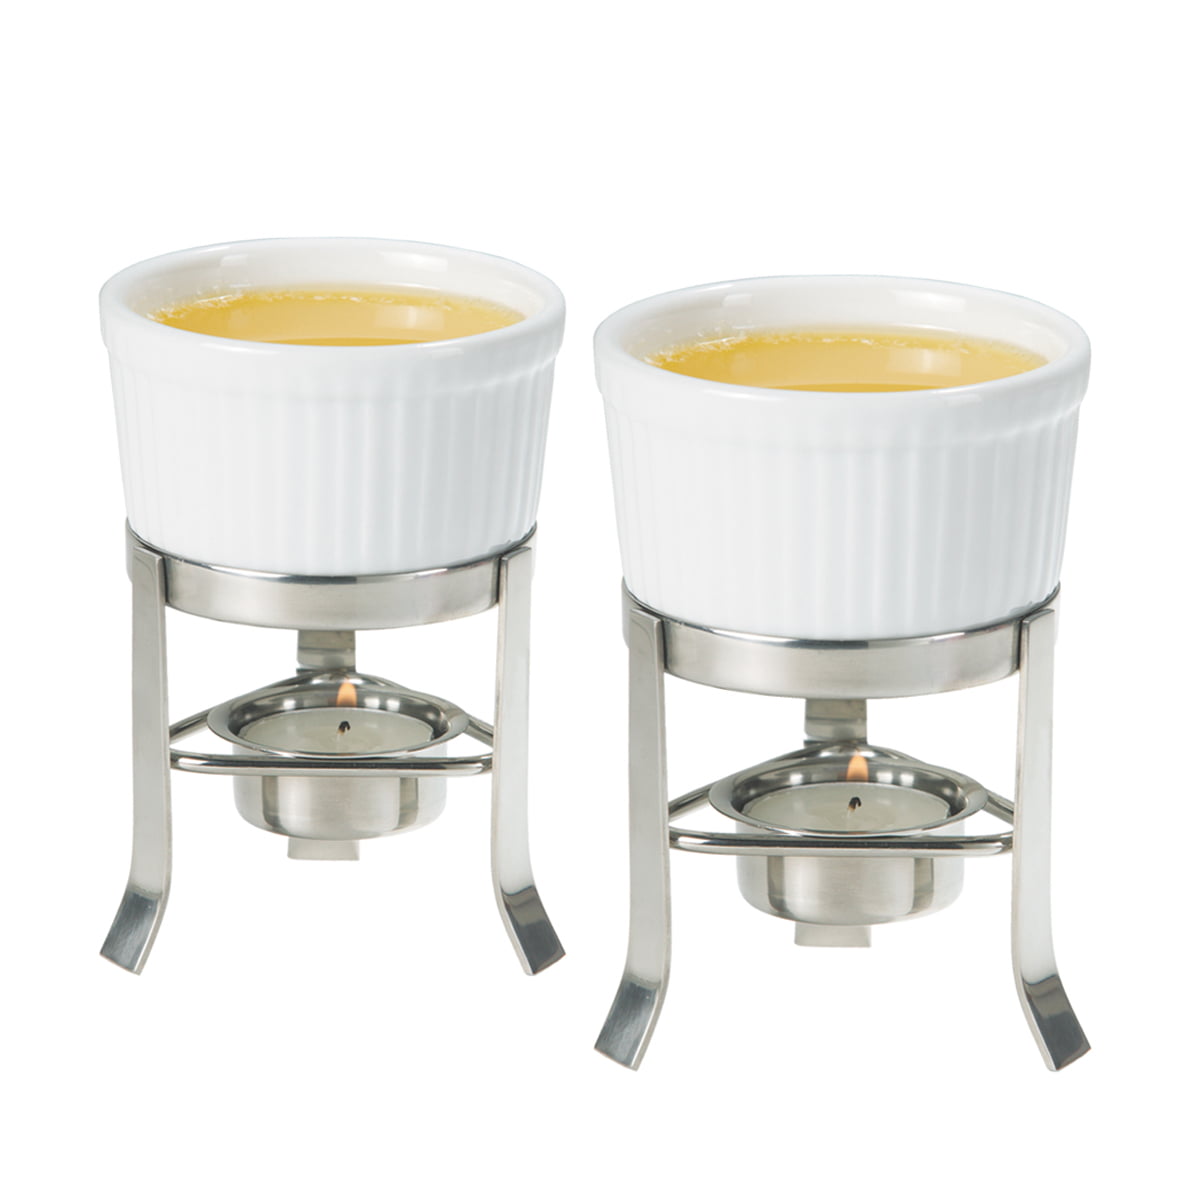 Oggi 2-Piece Butter Warmer Set with Stainless Steel Stand 1 